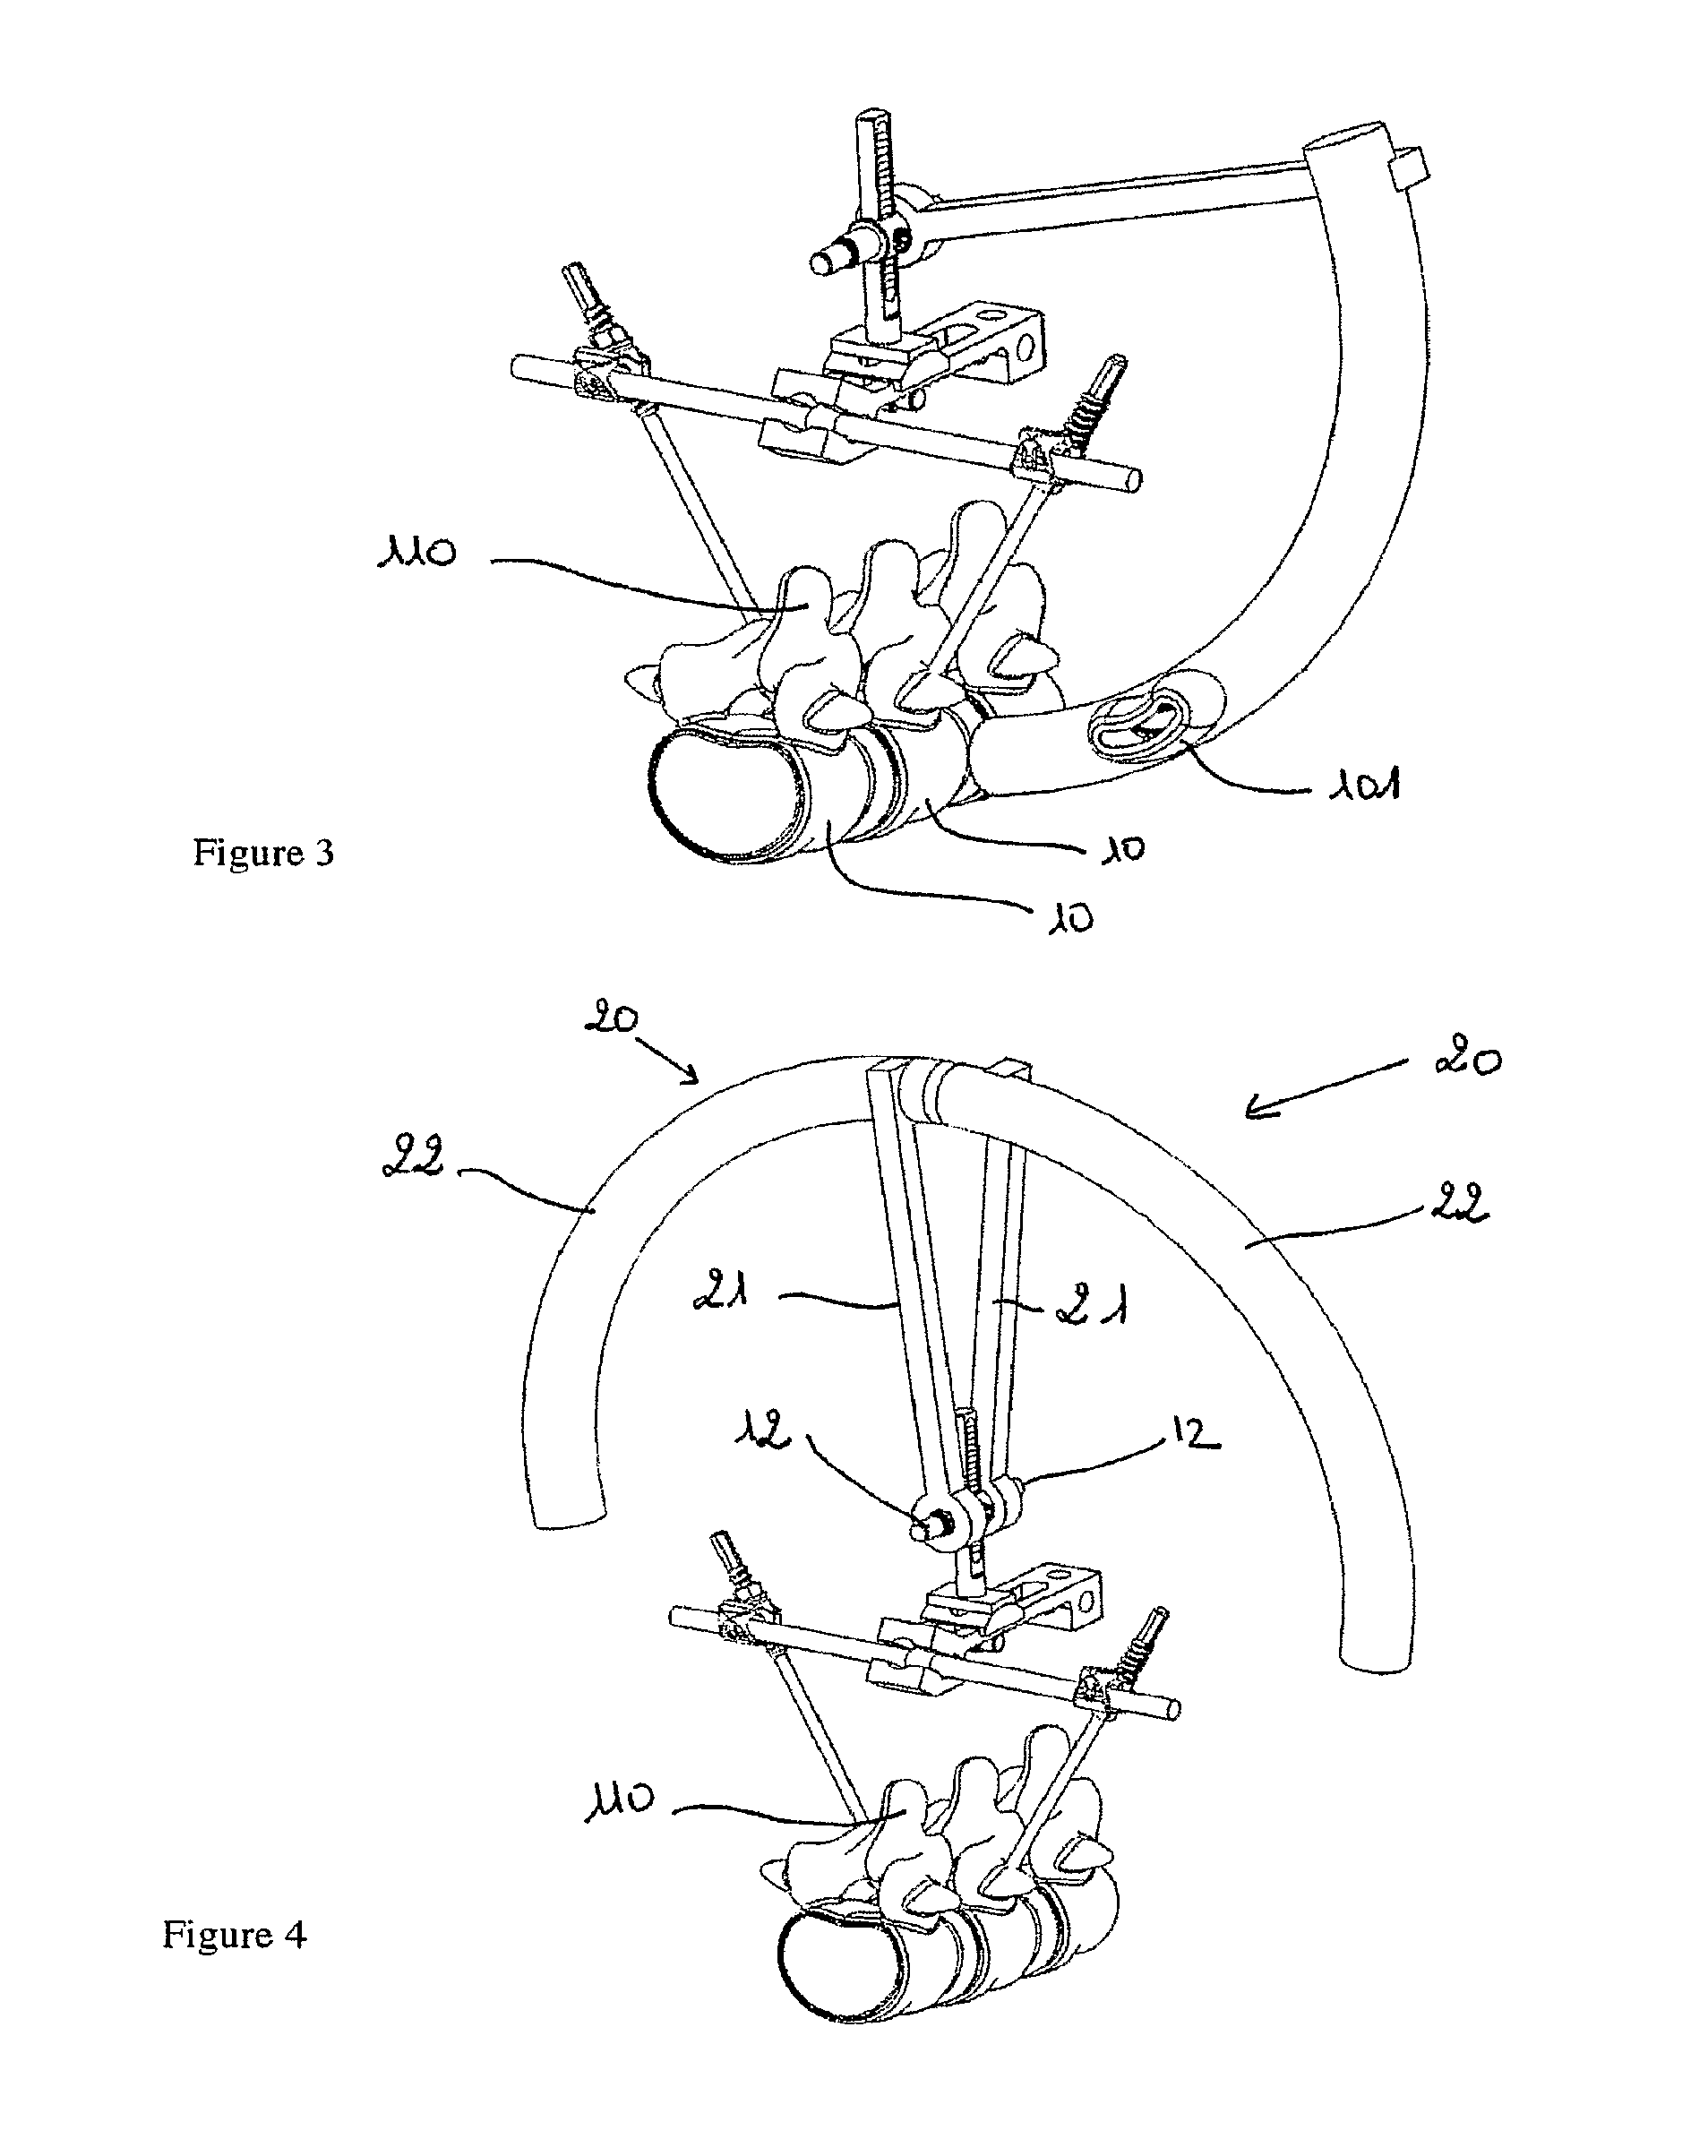 Device for Establishing an Anatomical Reference Point of an Intervertebral Disc